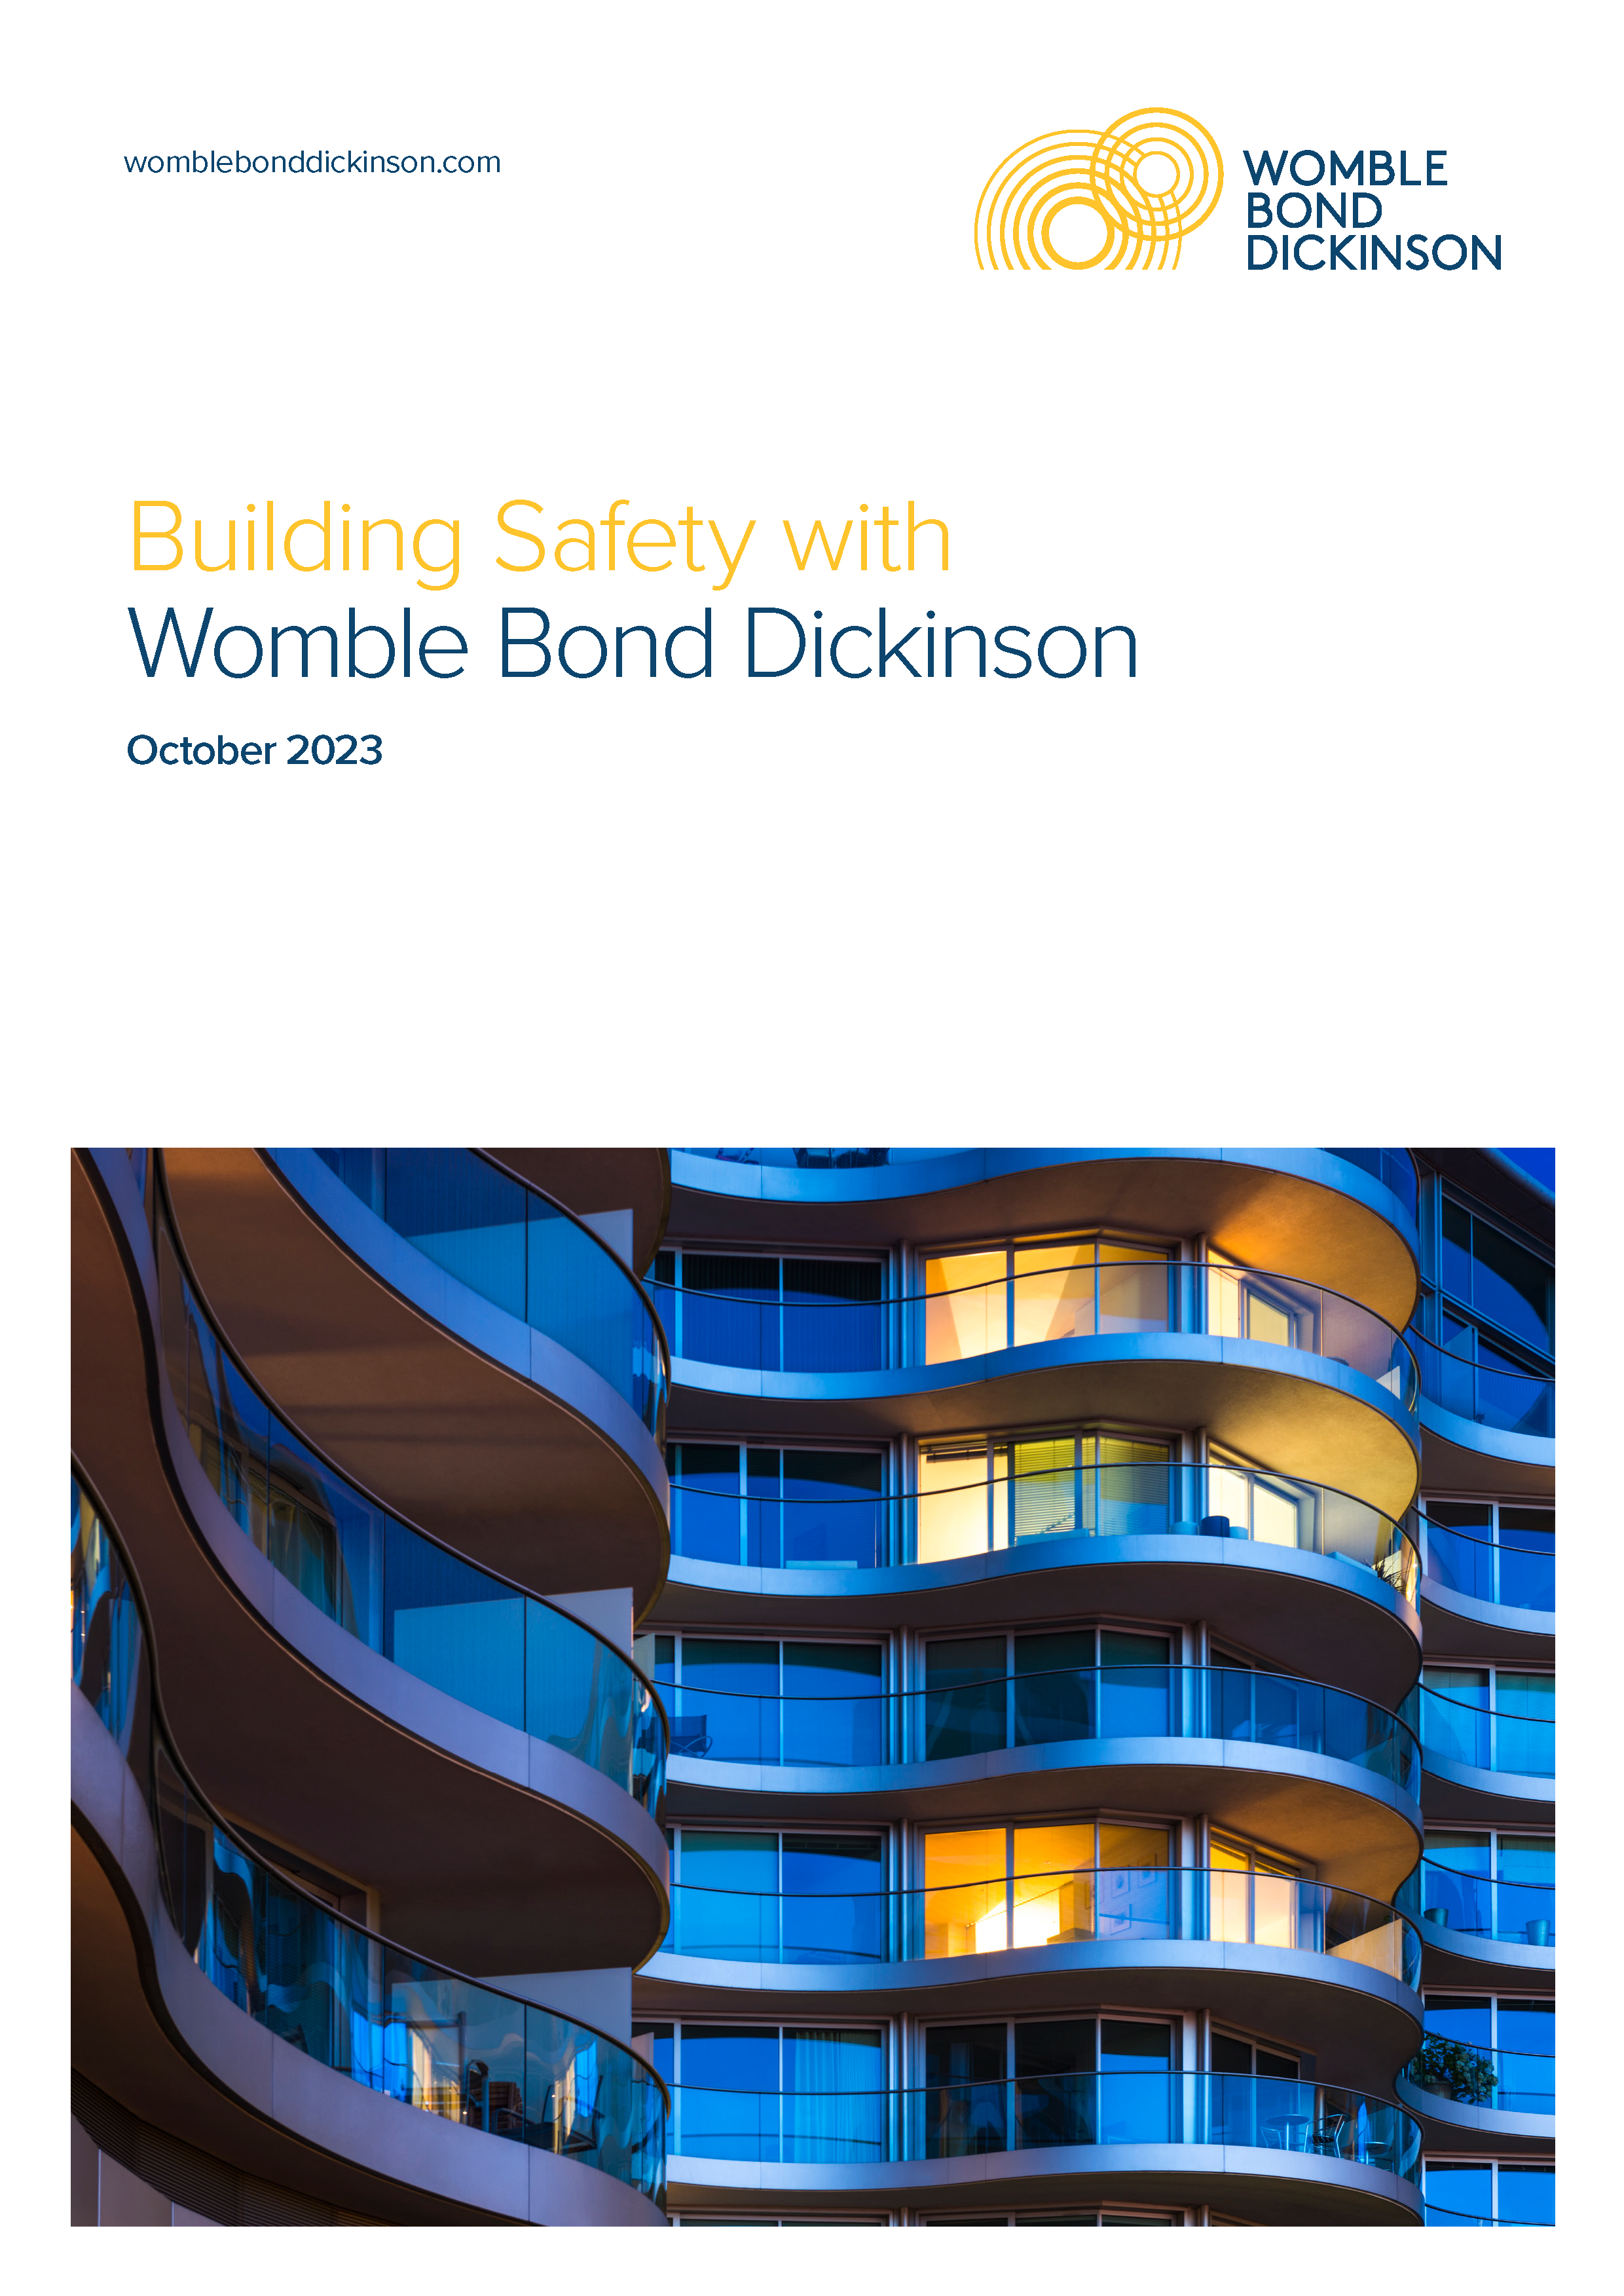 Building Safety with Womble Bond Dickinson